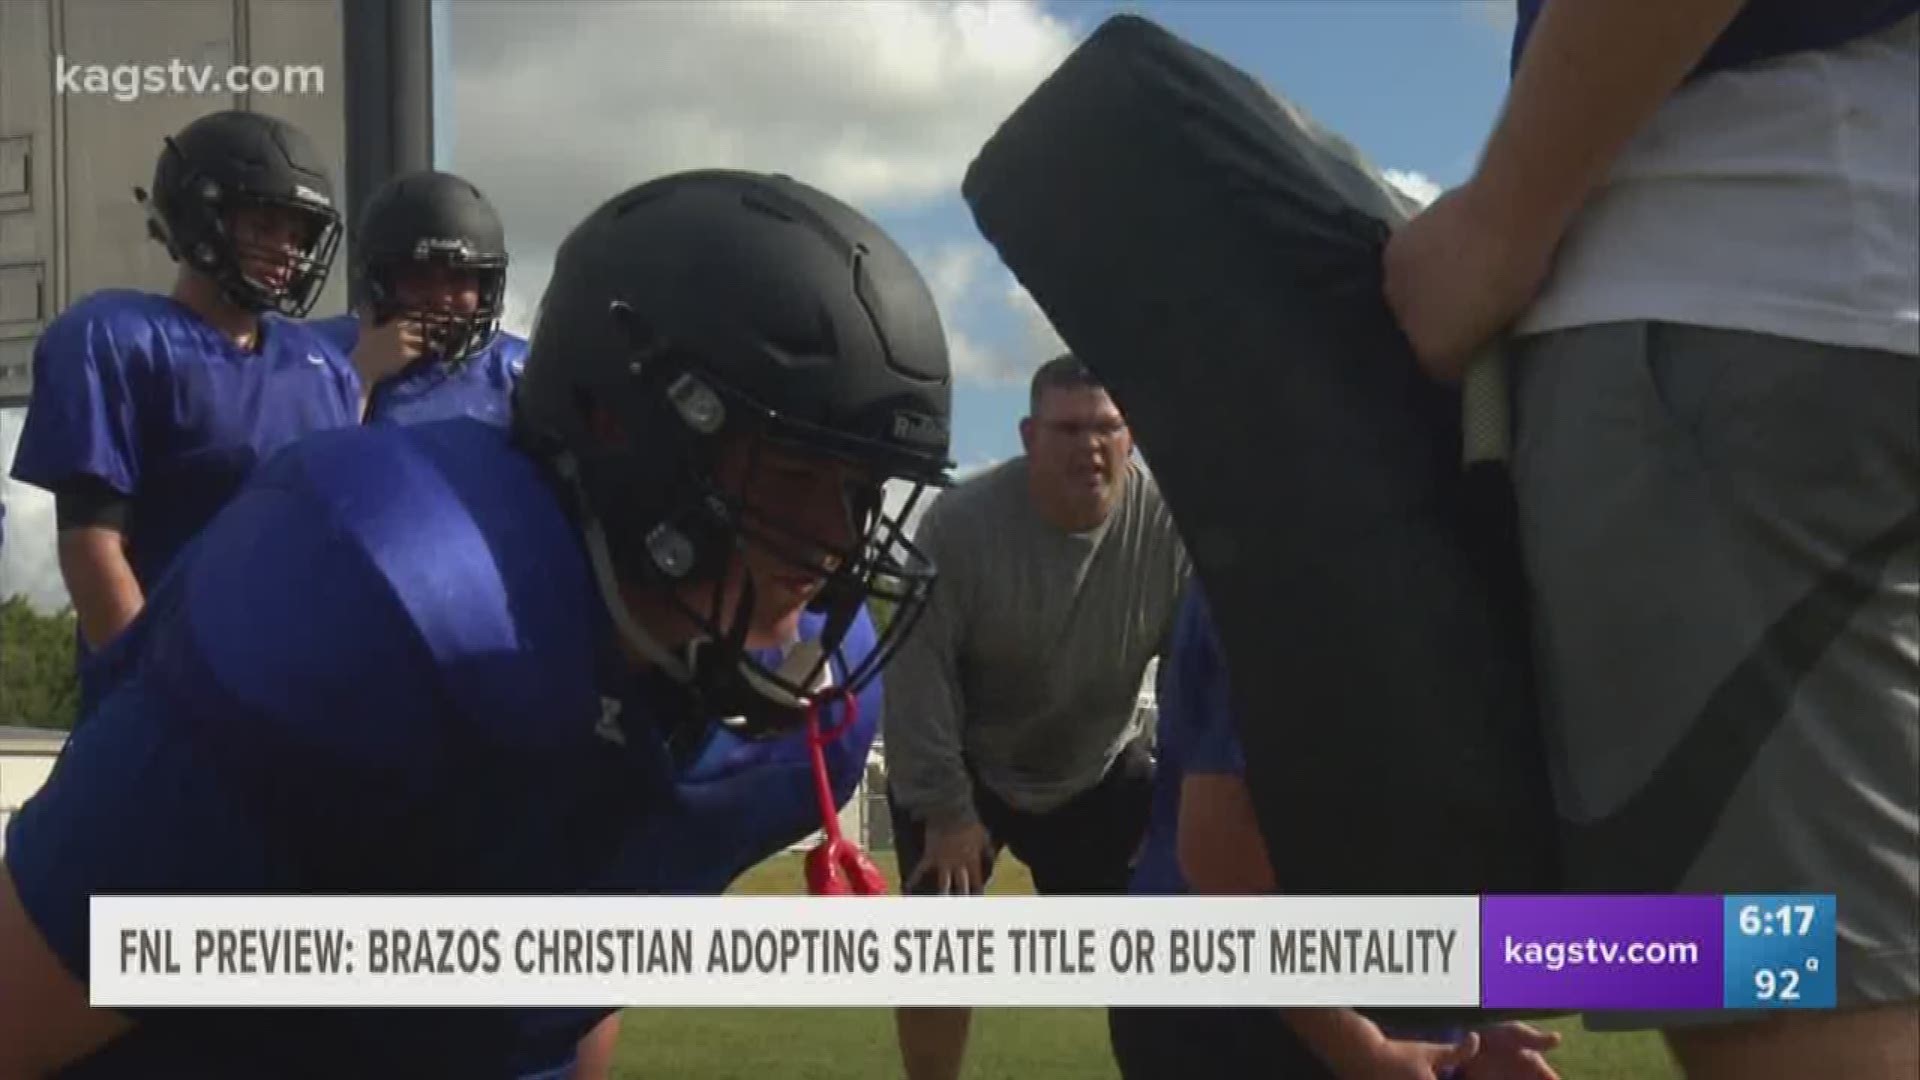 The past two seasons, Brazos Christian has made it to the TAPPS state semifinals. They lost their star running back, but the Eagles are hoping to kick down the state final door.